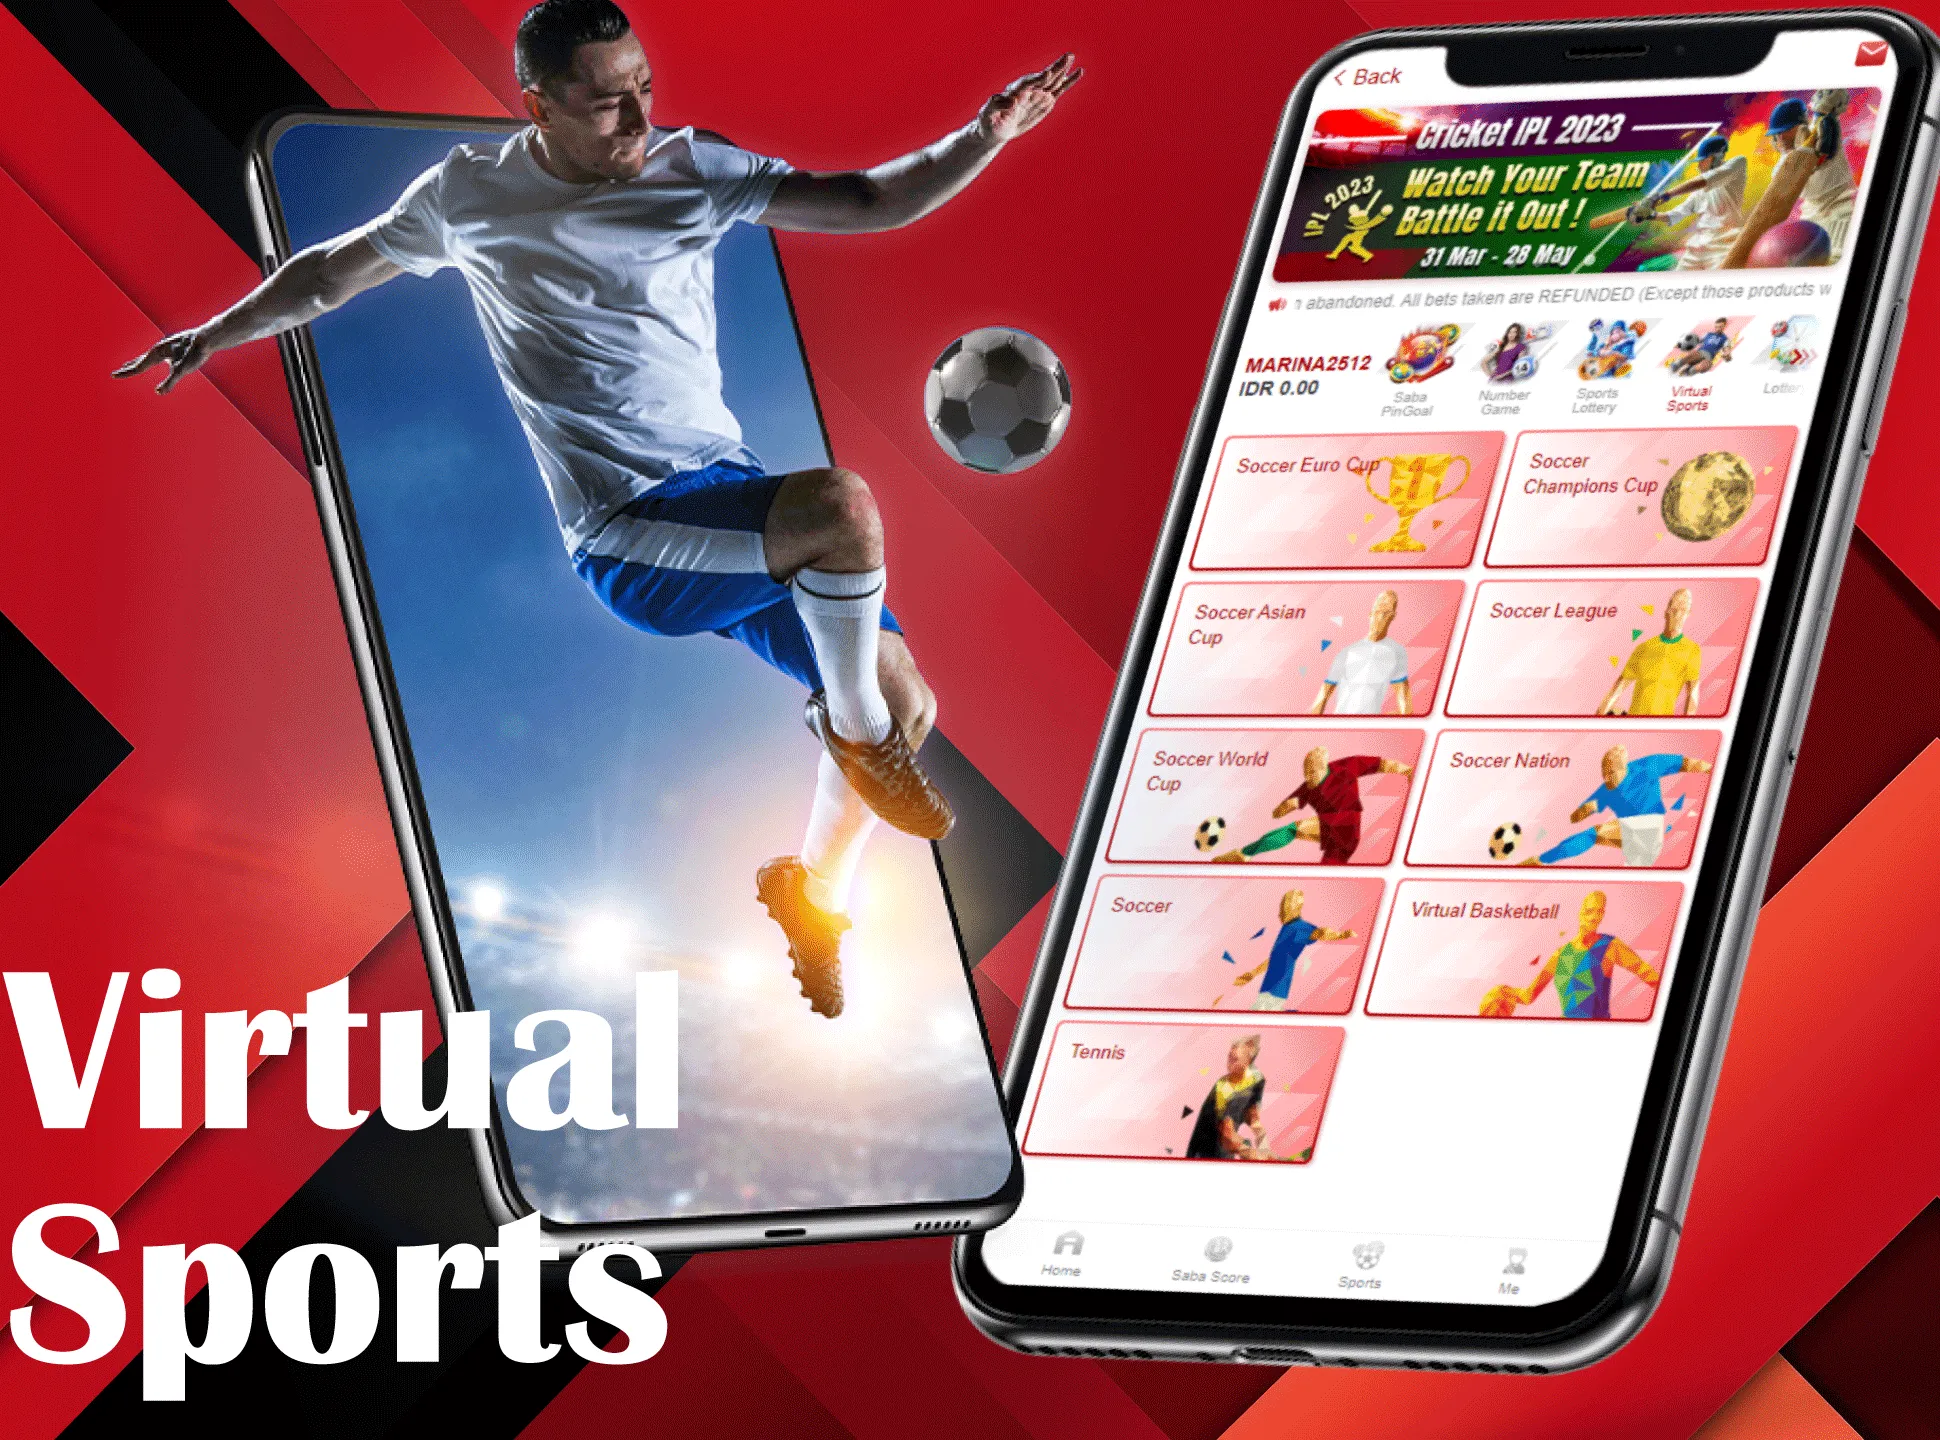 Bet on the virtual sports as well as on real sports in the Dafabet app.